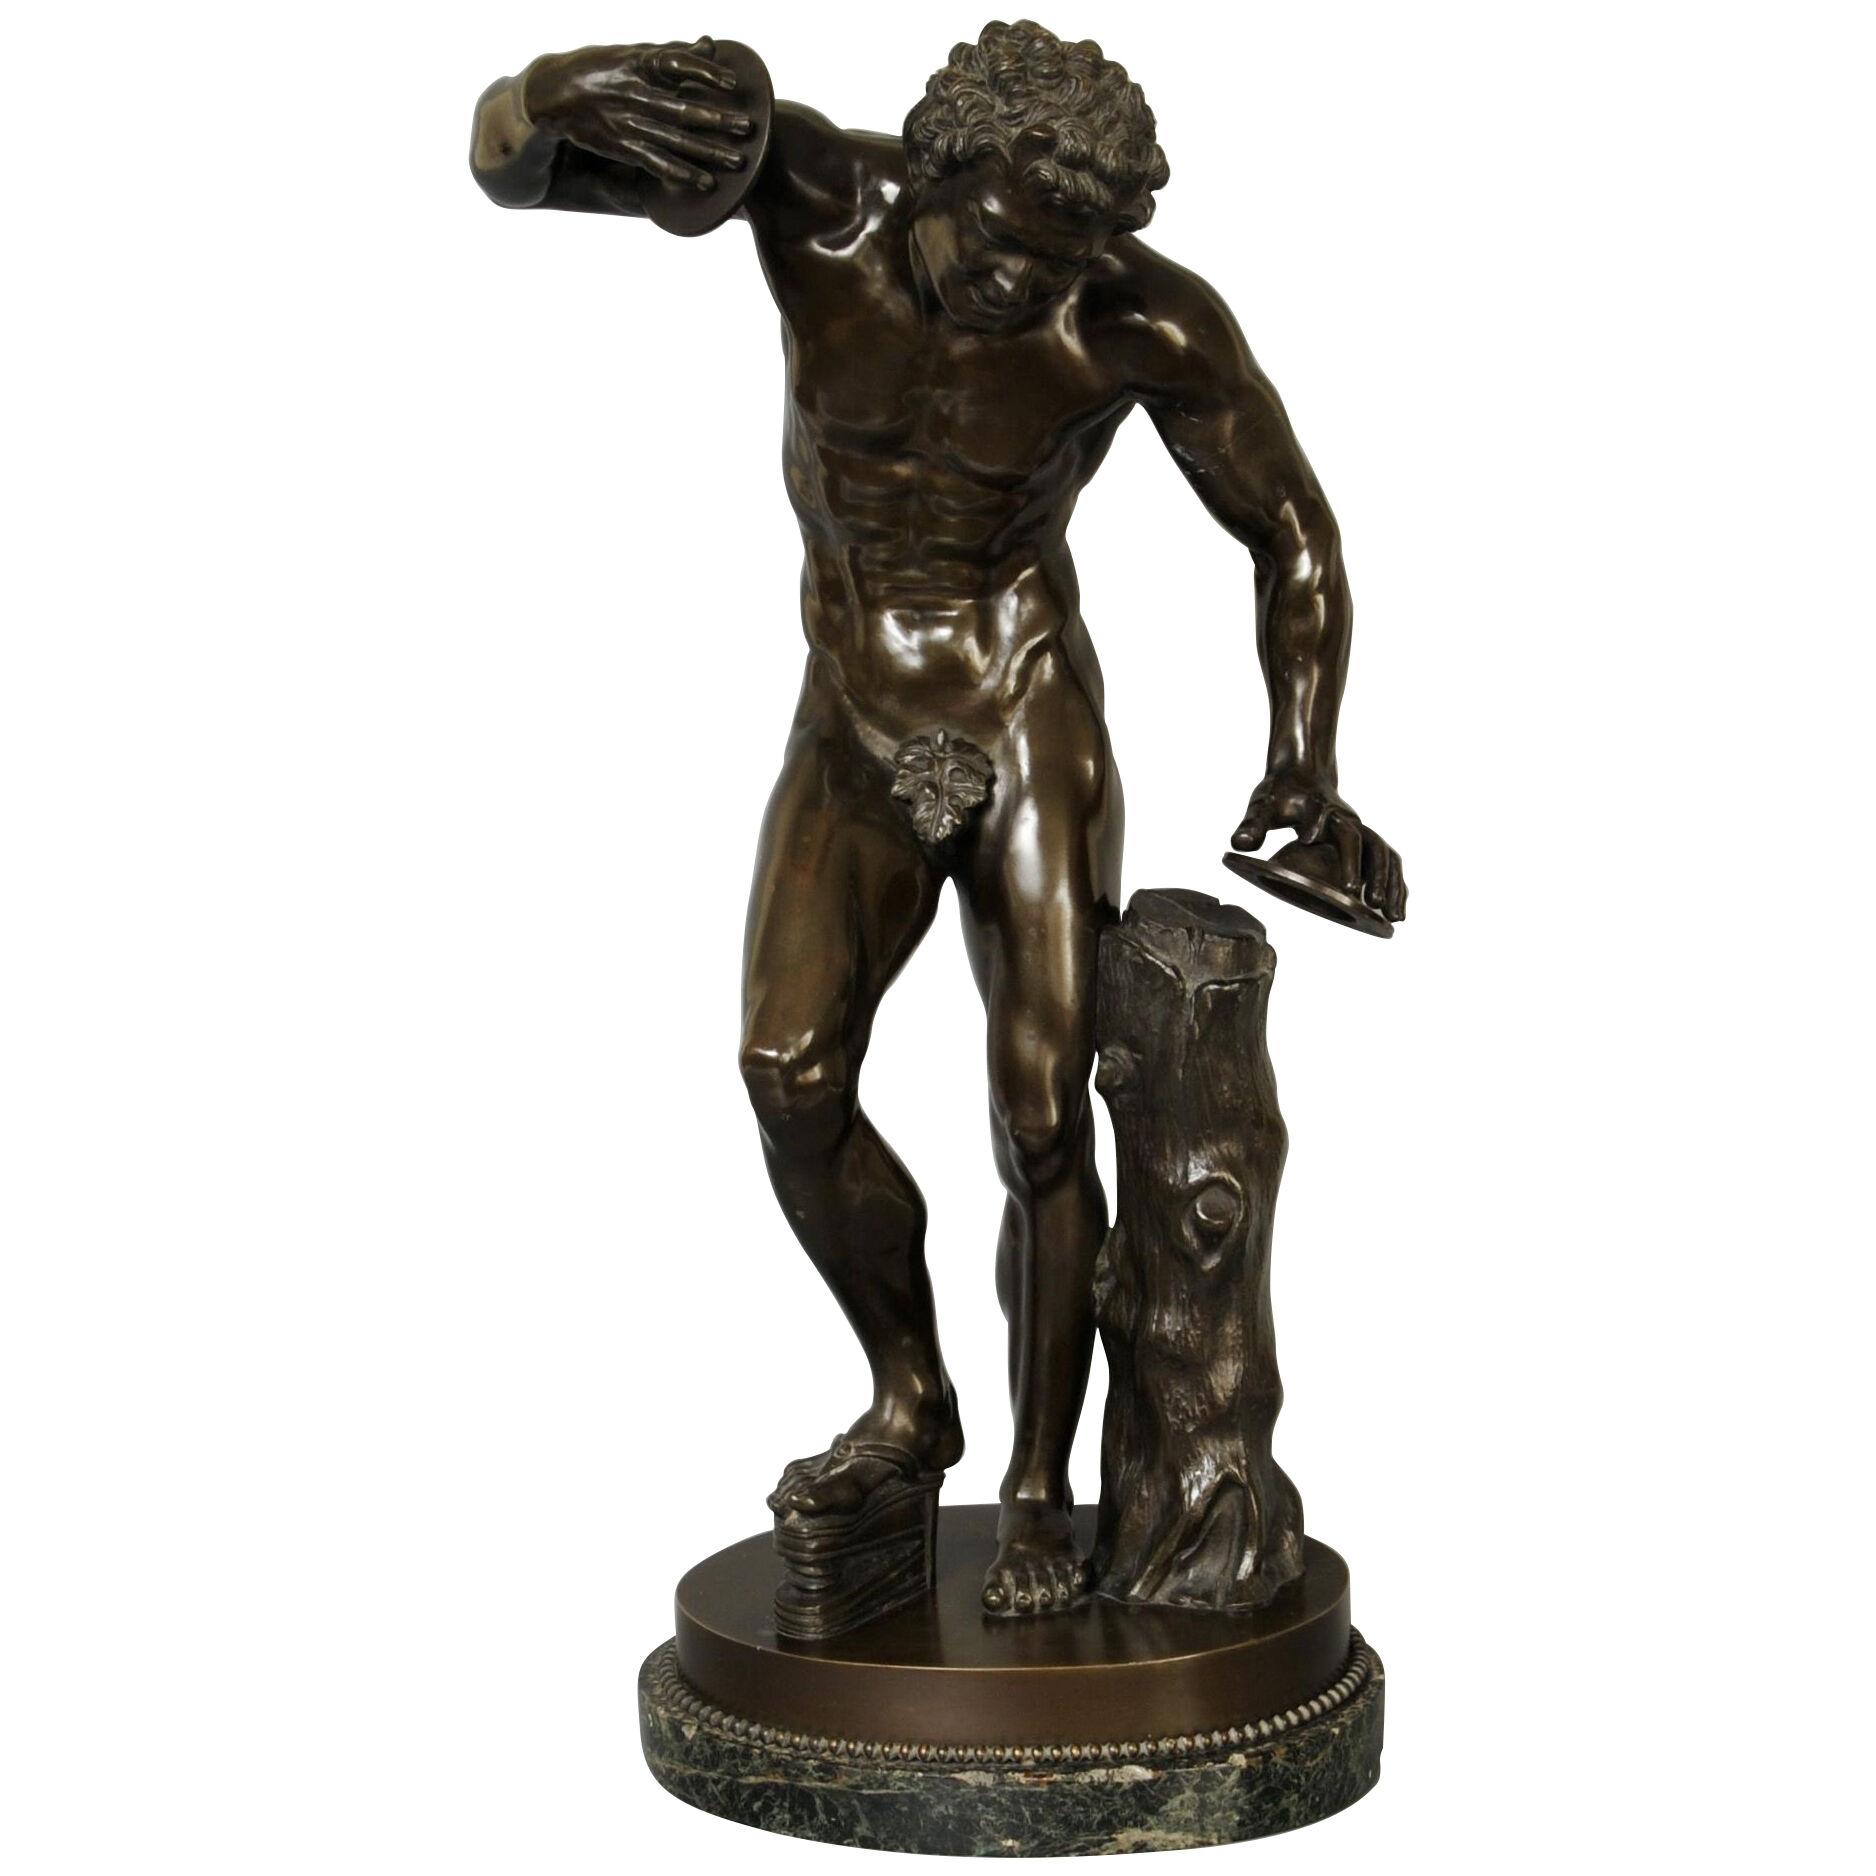 Italian 19th Century Grand Tour Bronze of the Dancing Faun with Cymbals